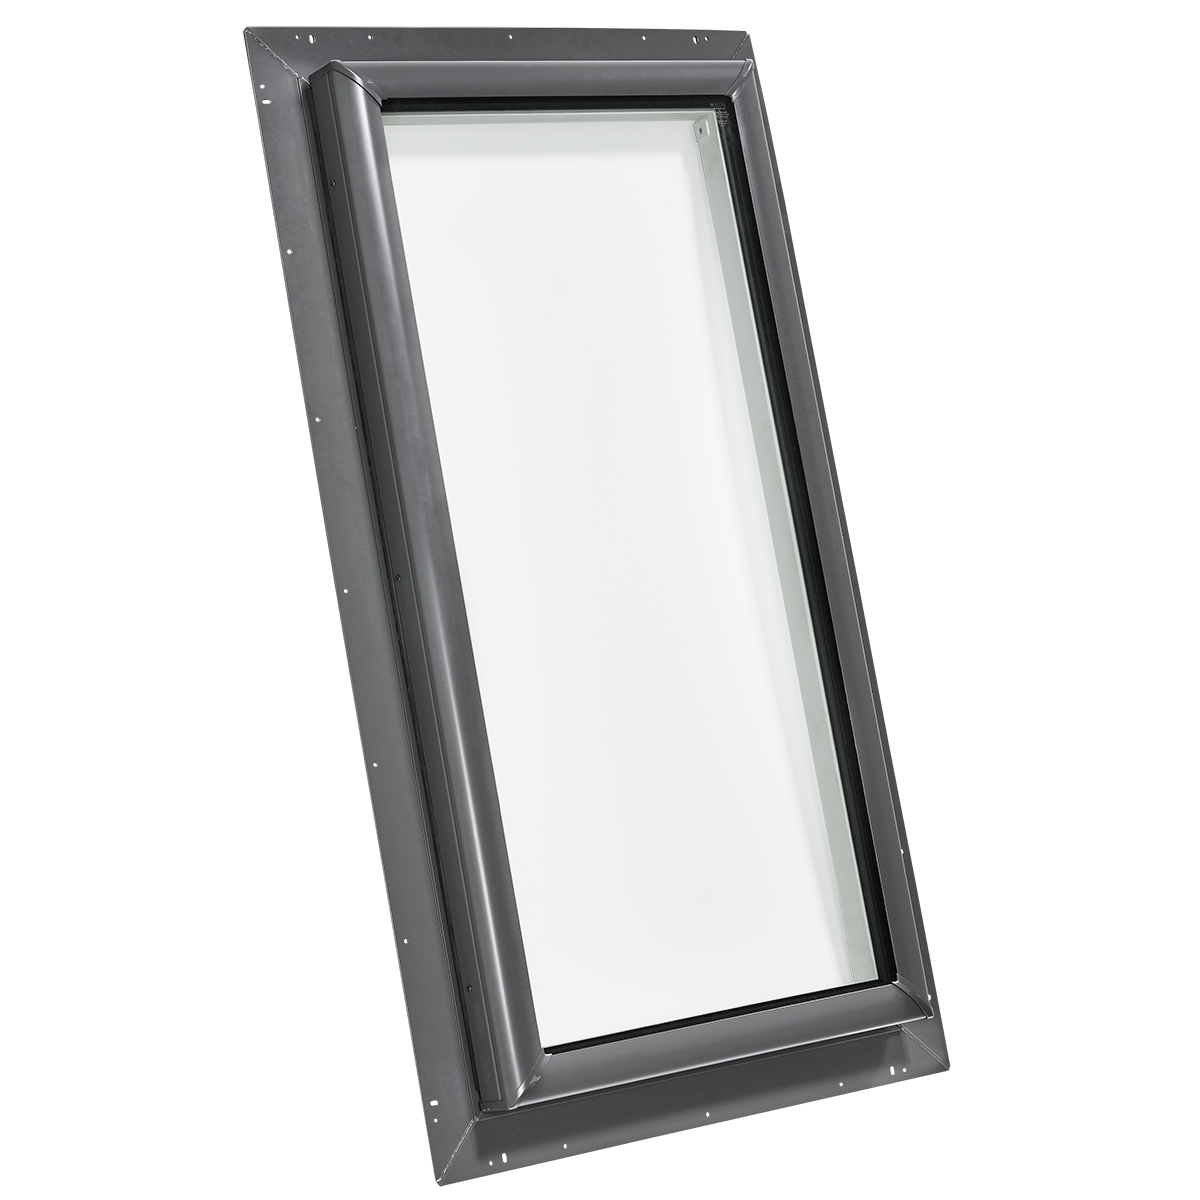 Fixed Self-Flashed Skylight with Laminated Low-E3 Glass - 30-1/2 in. x 30-1/2 in. - QPF 3030